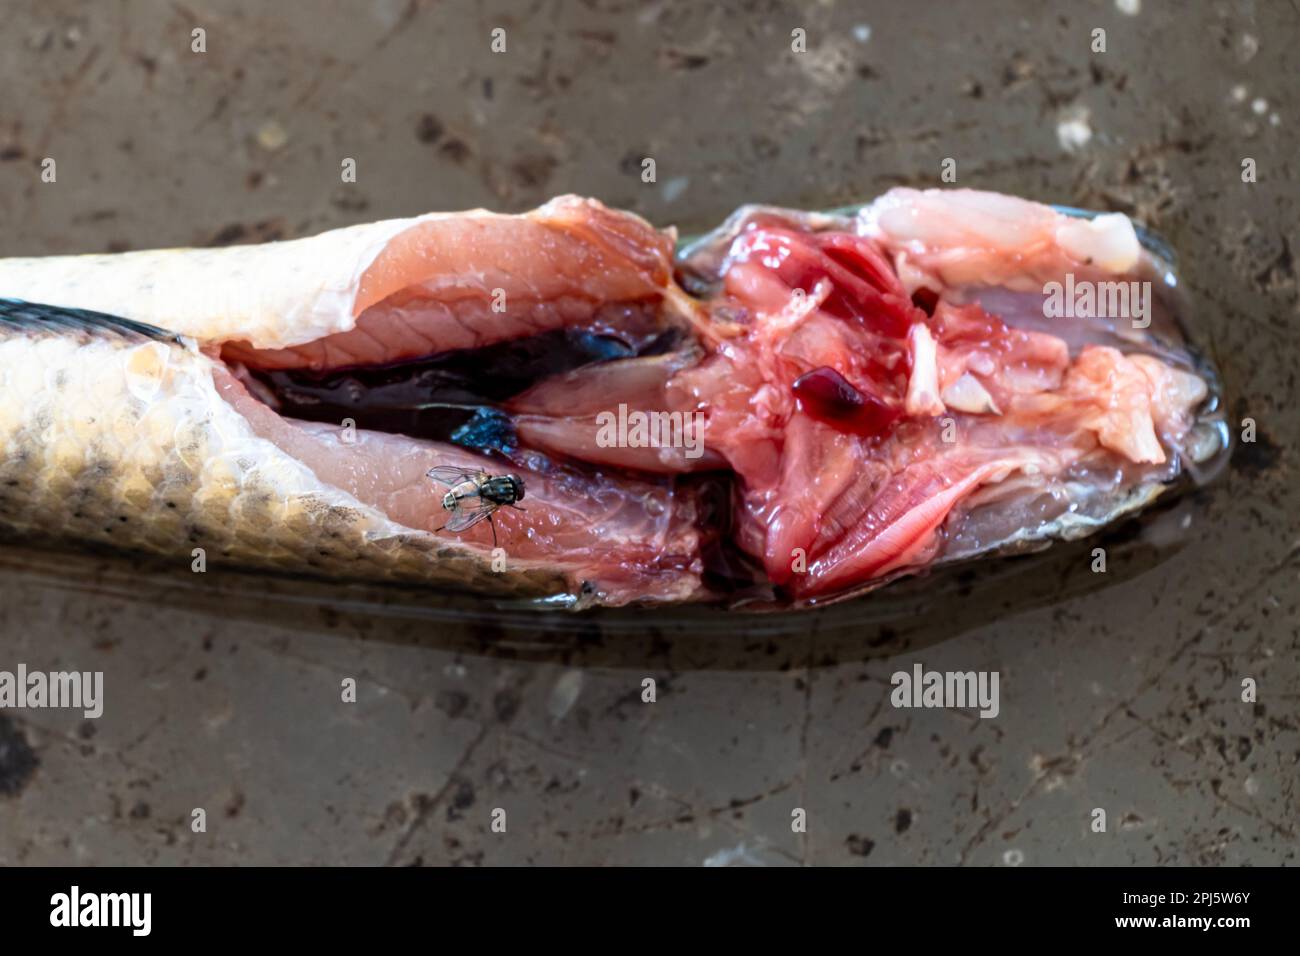 Dissection of Lata Fish, Dissection of Cranial Nerves. Circulatory System of Channa Punctatus (Lata Fish) | Zoology, Zoology practical Stock Photo